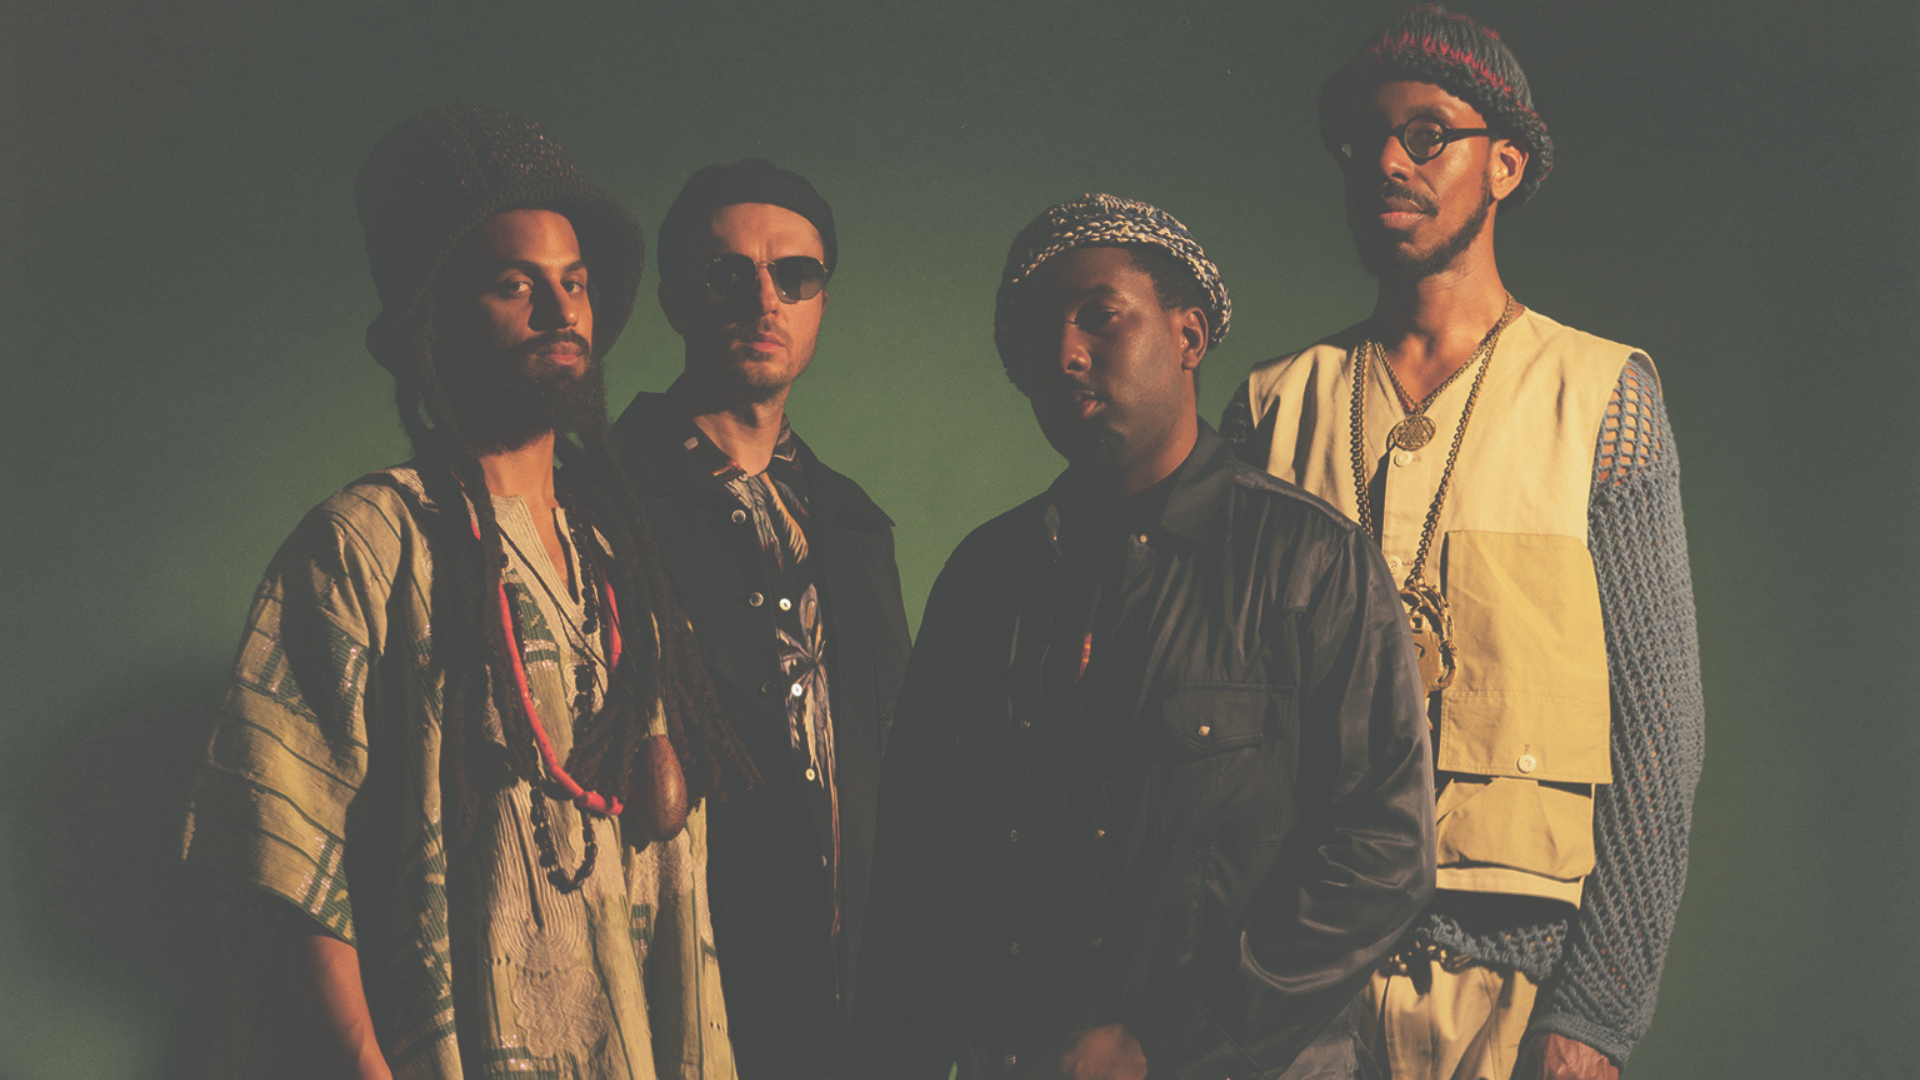 Shabaka Hutchings (right) says Sons of Kemet’s new album redefines what it means to struggle for Black power. Photo: Udoma Janssen